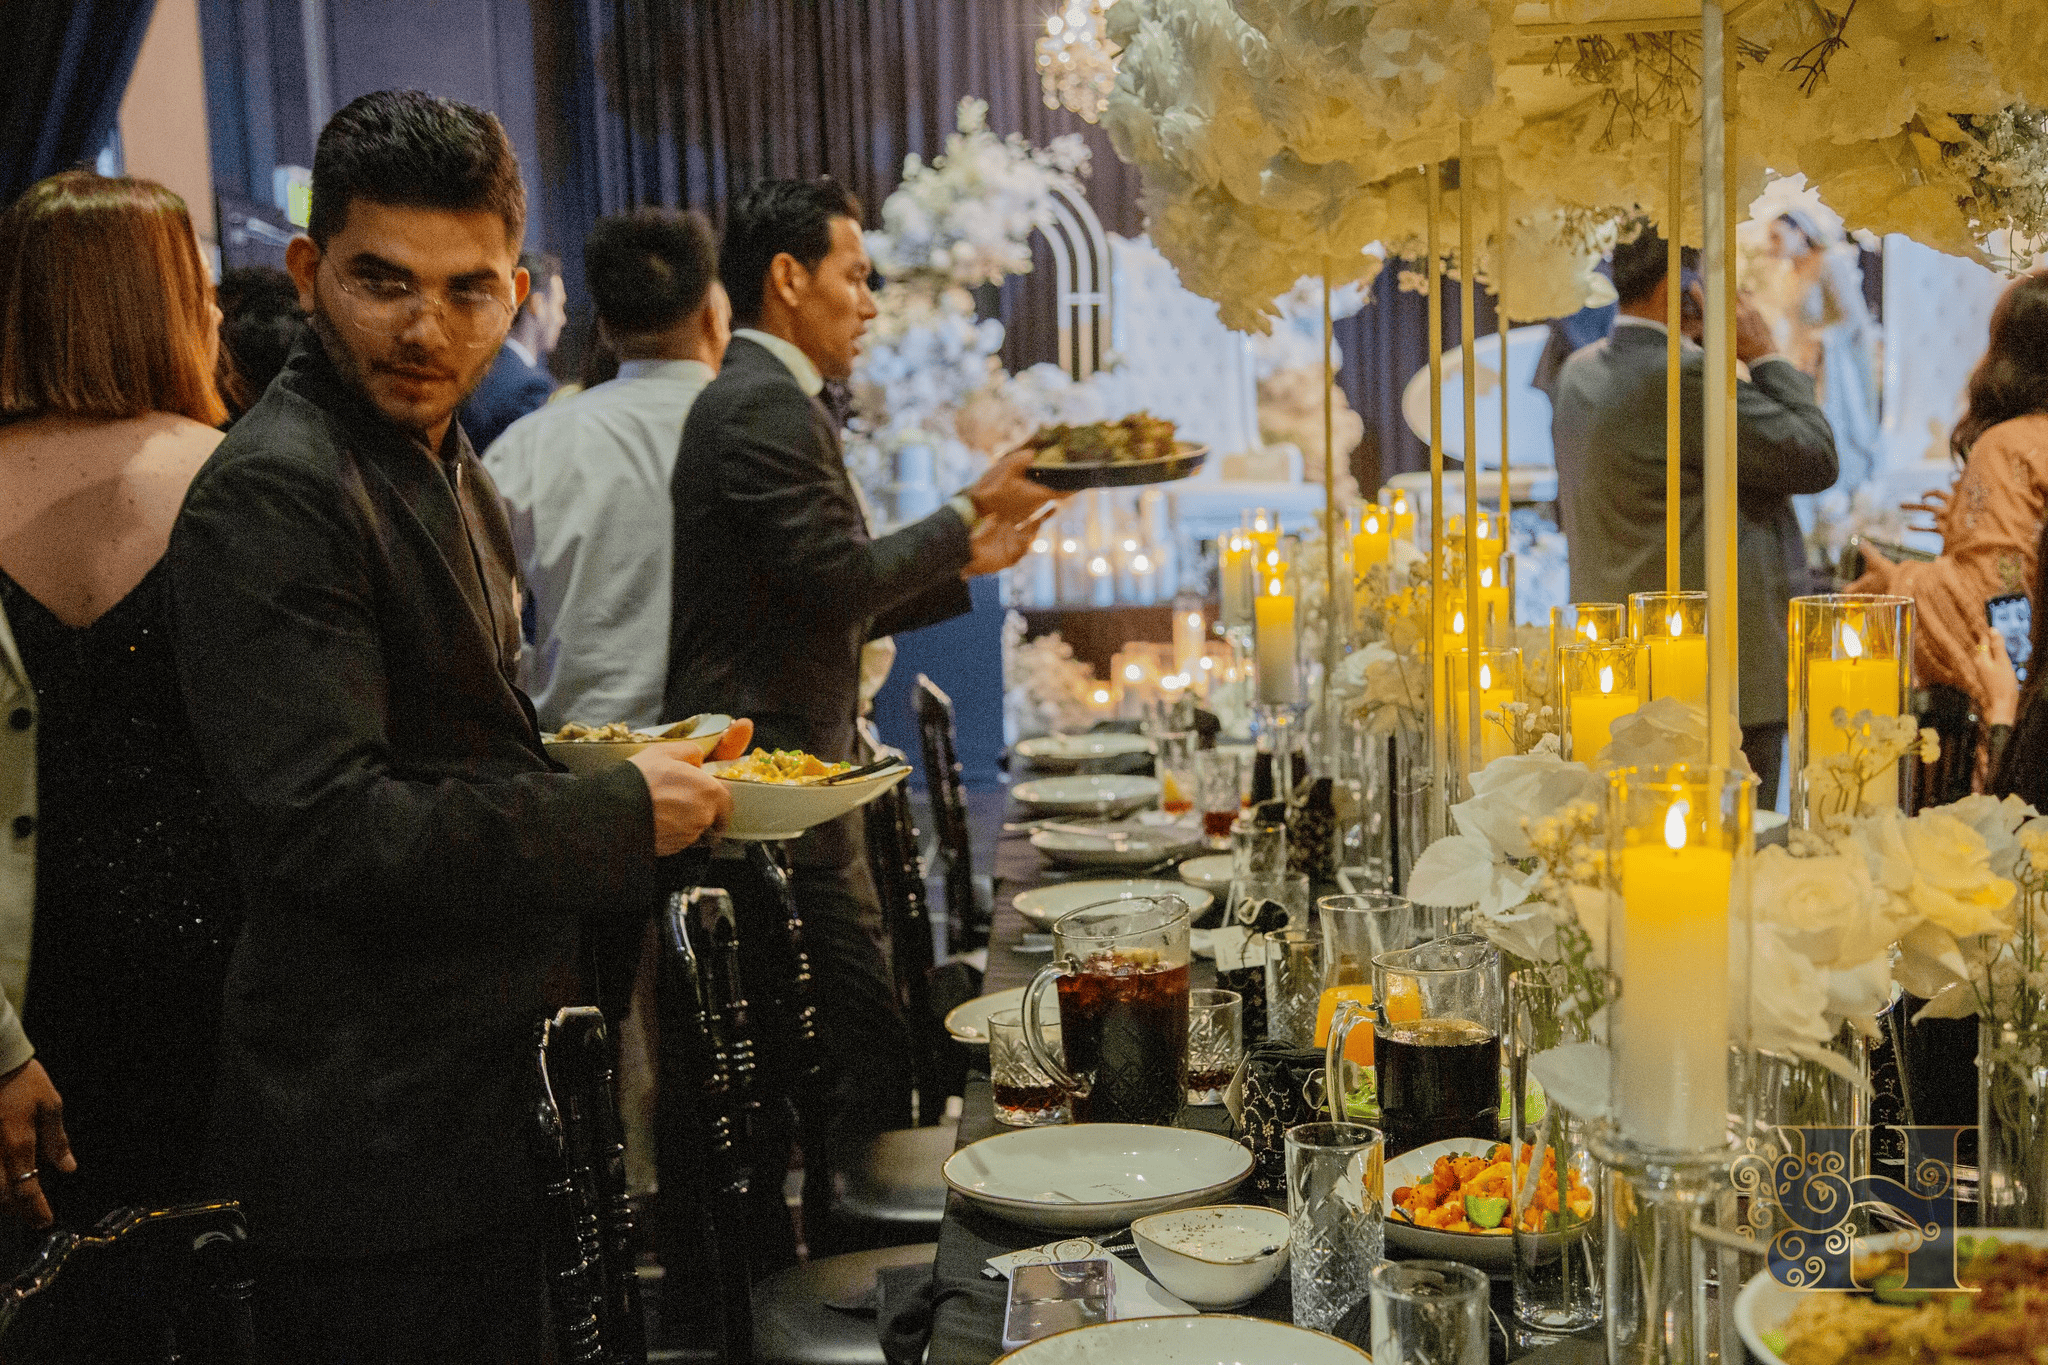 People enjoying a standing buffet-style dinner, gathered around tables filled with assorted dishes.